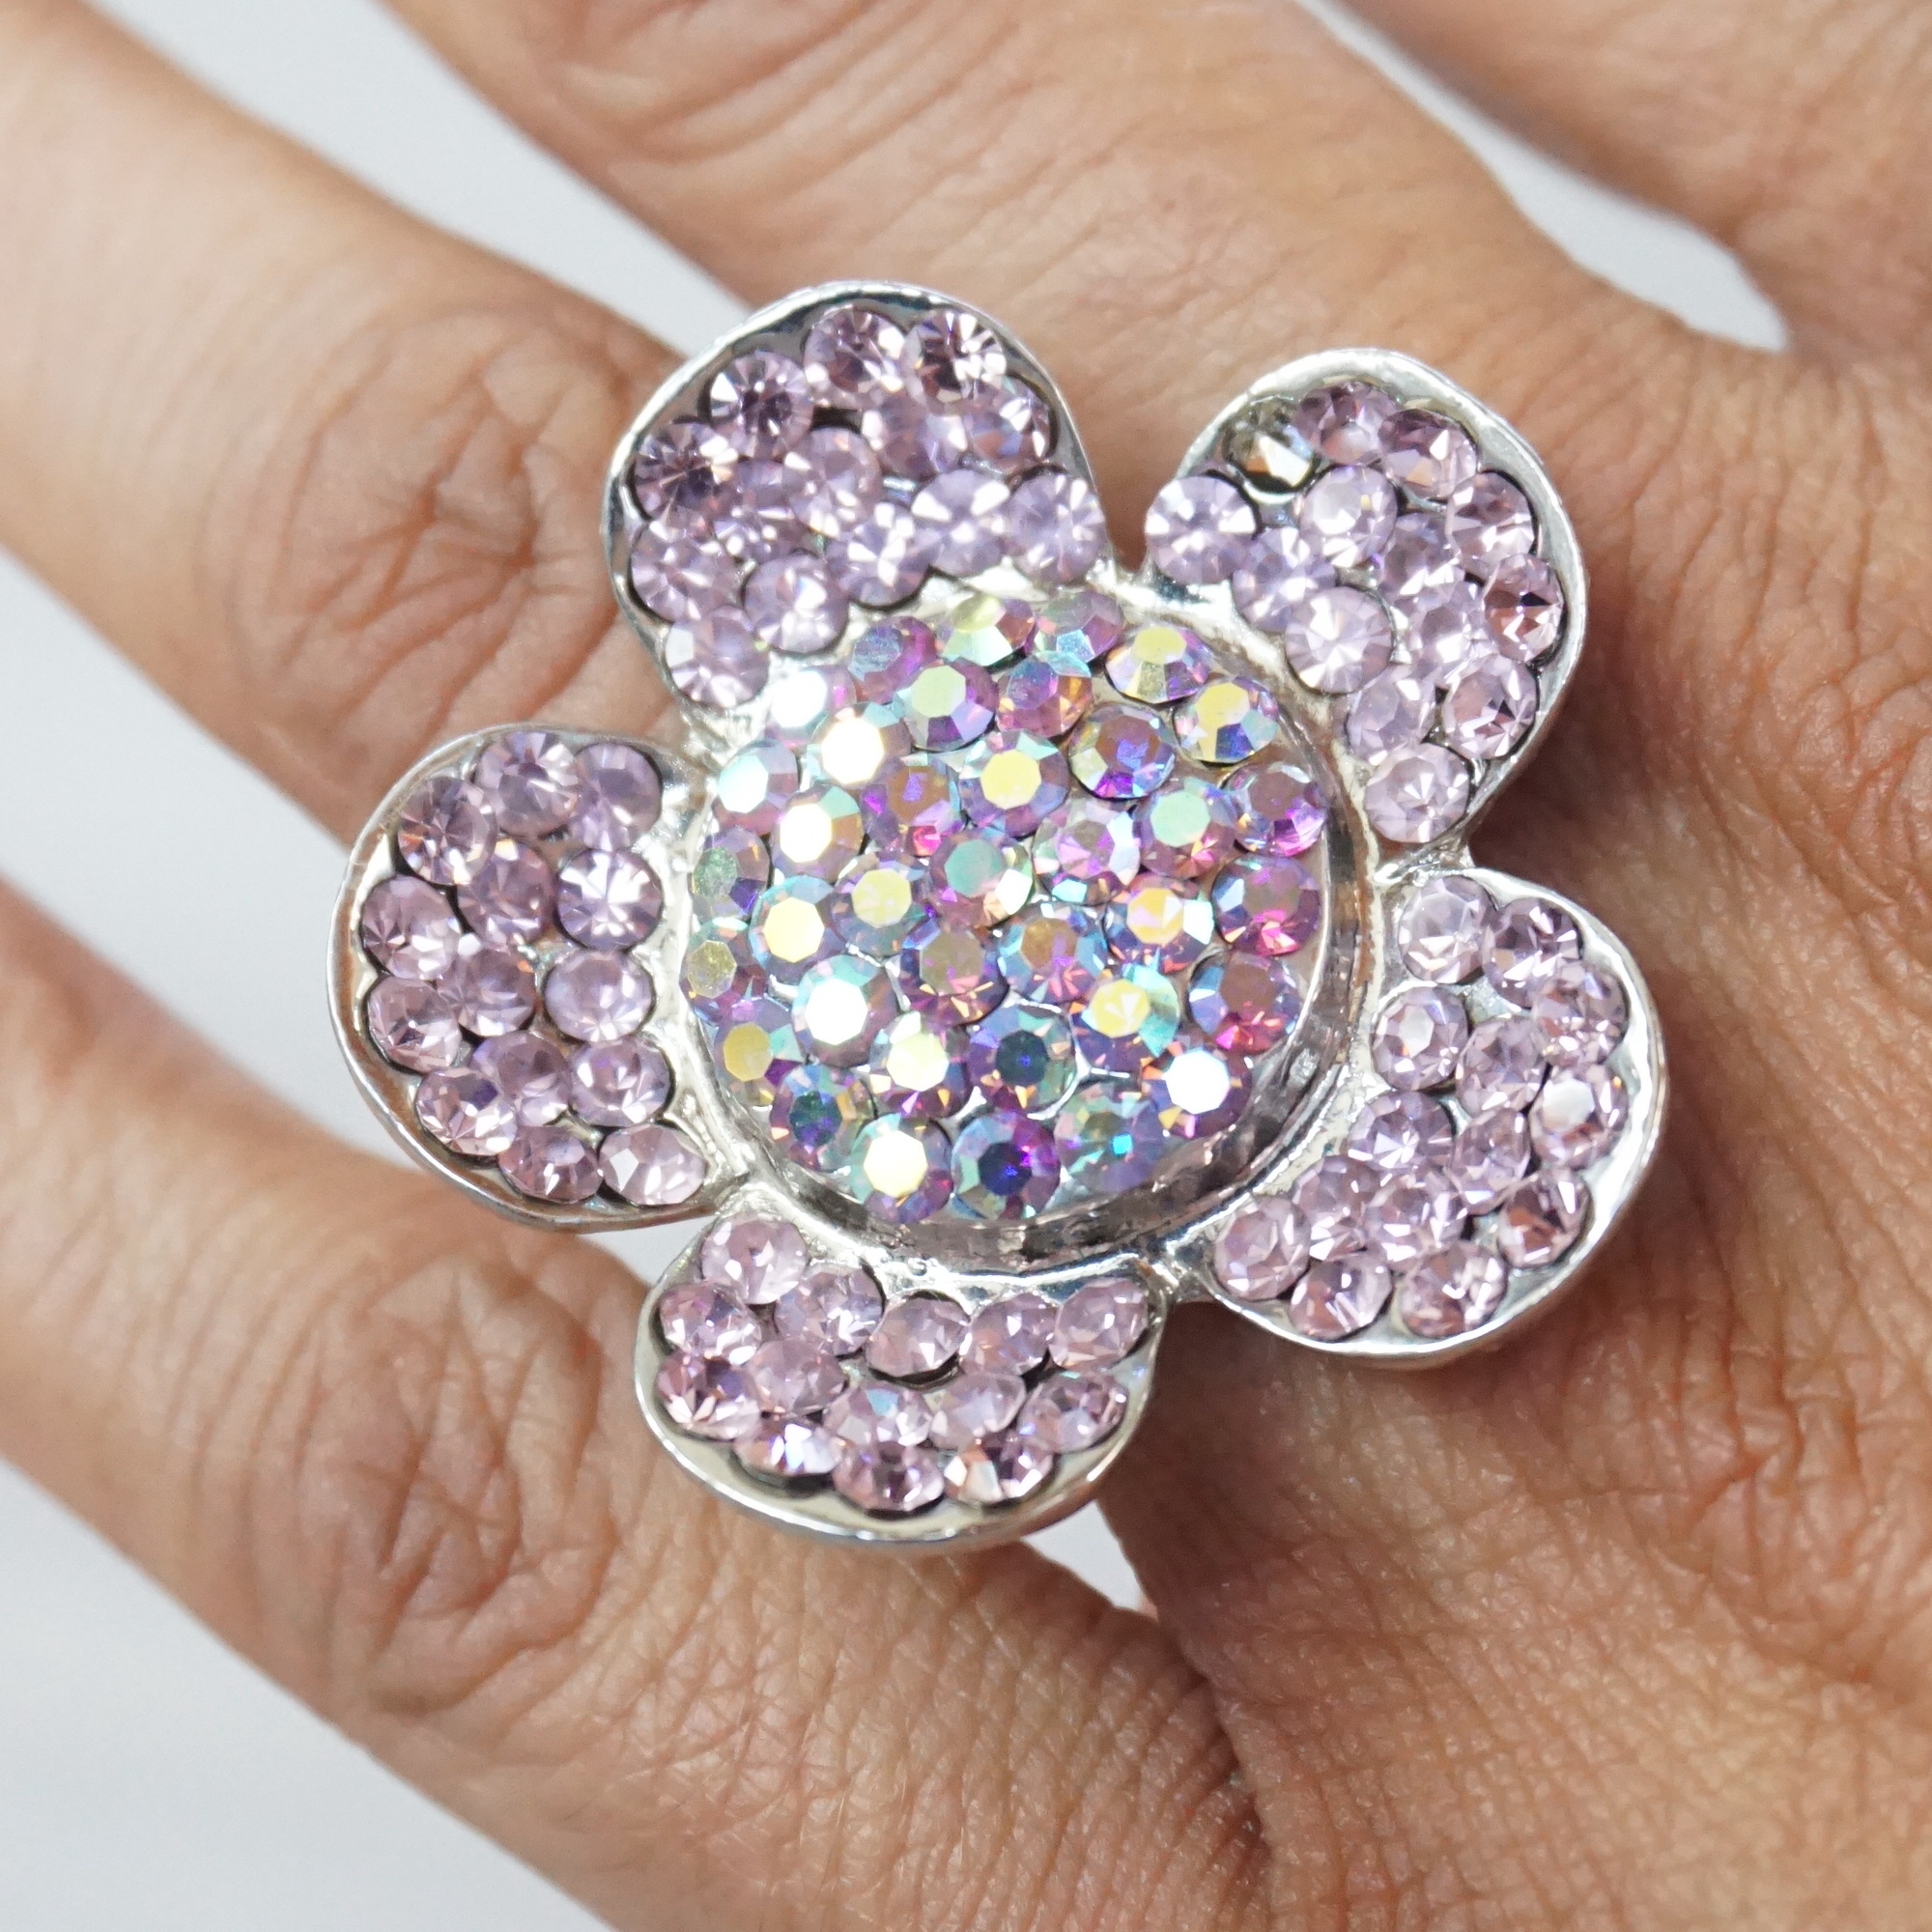 Crystal Daisy Ring in Pink on Finger